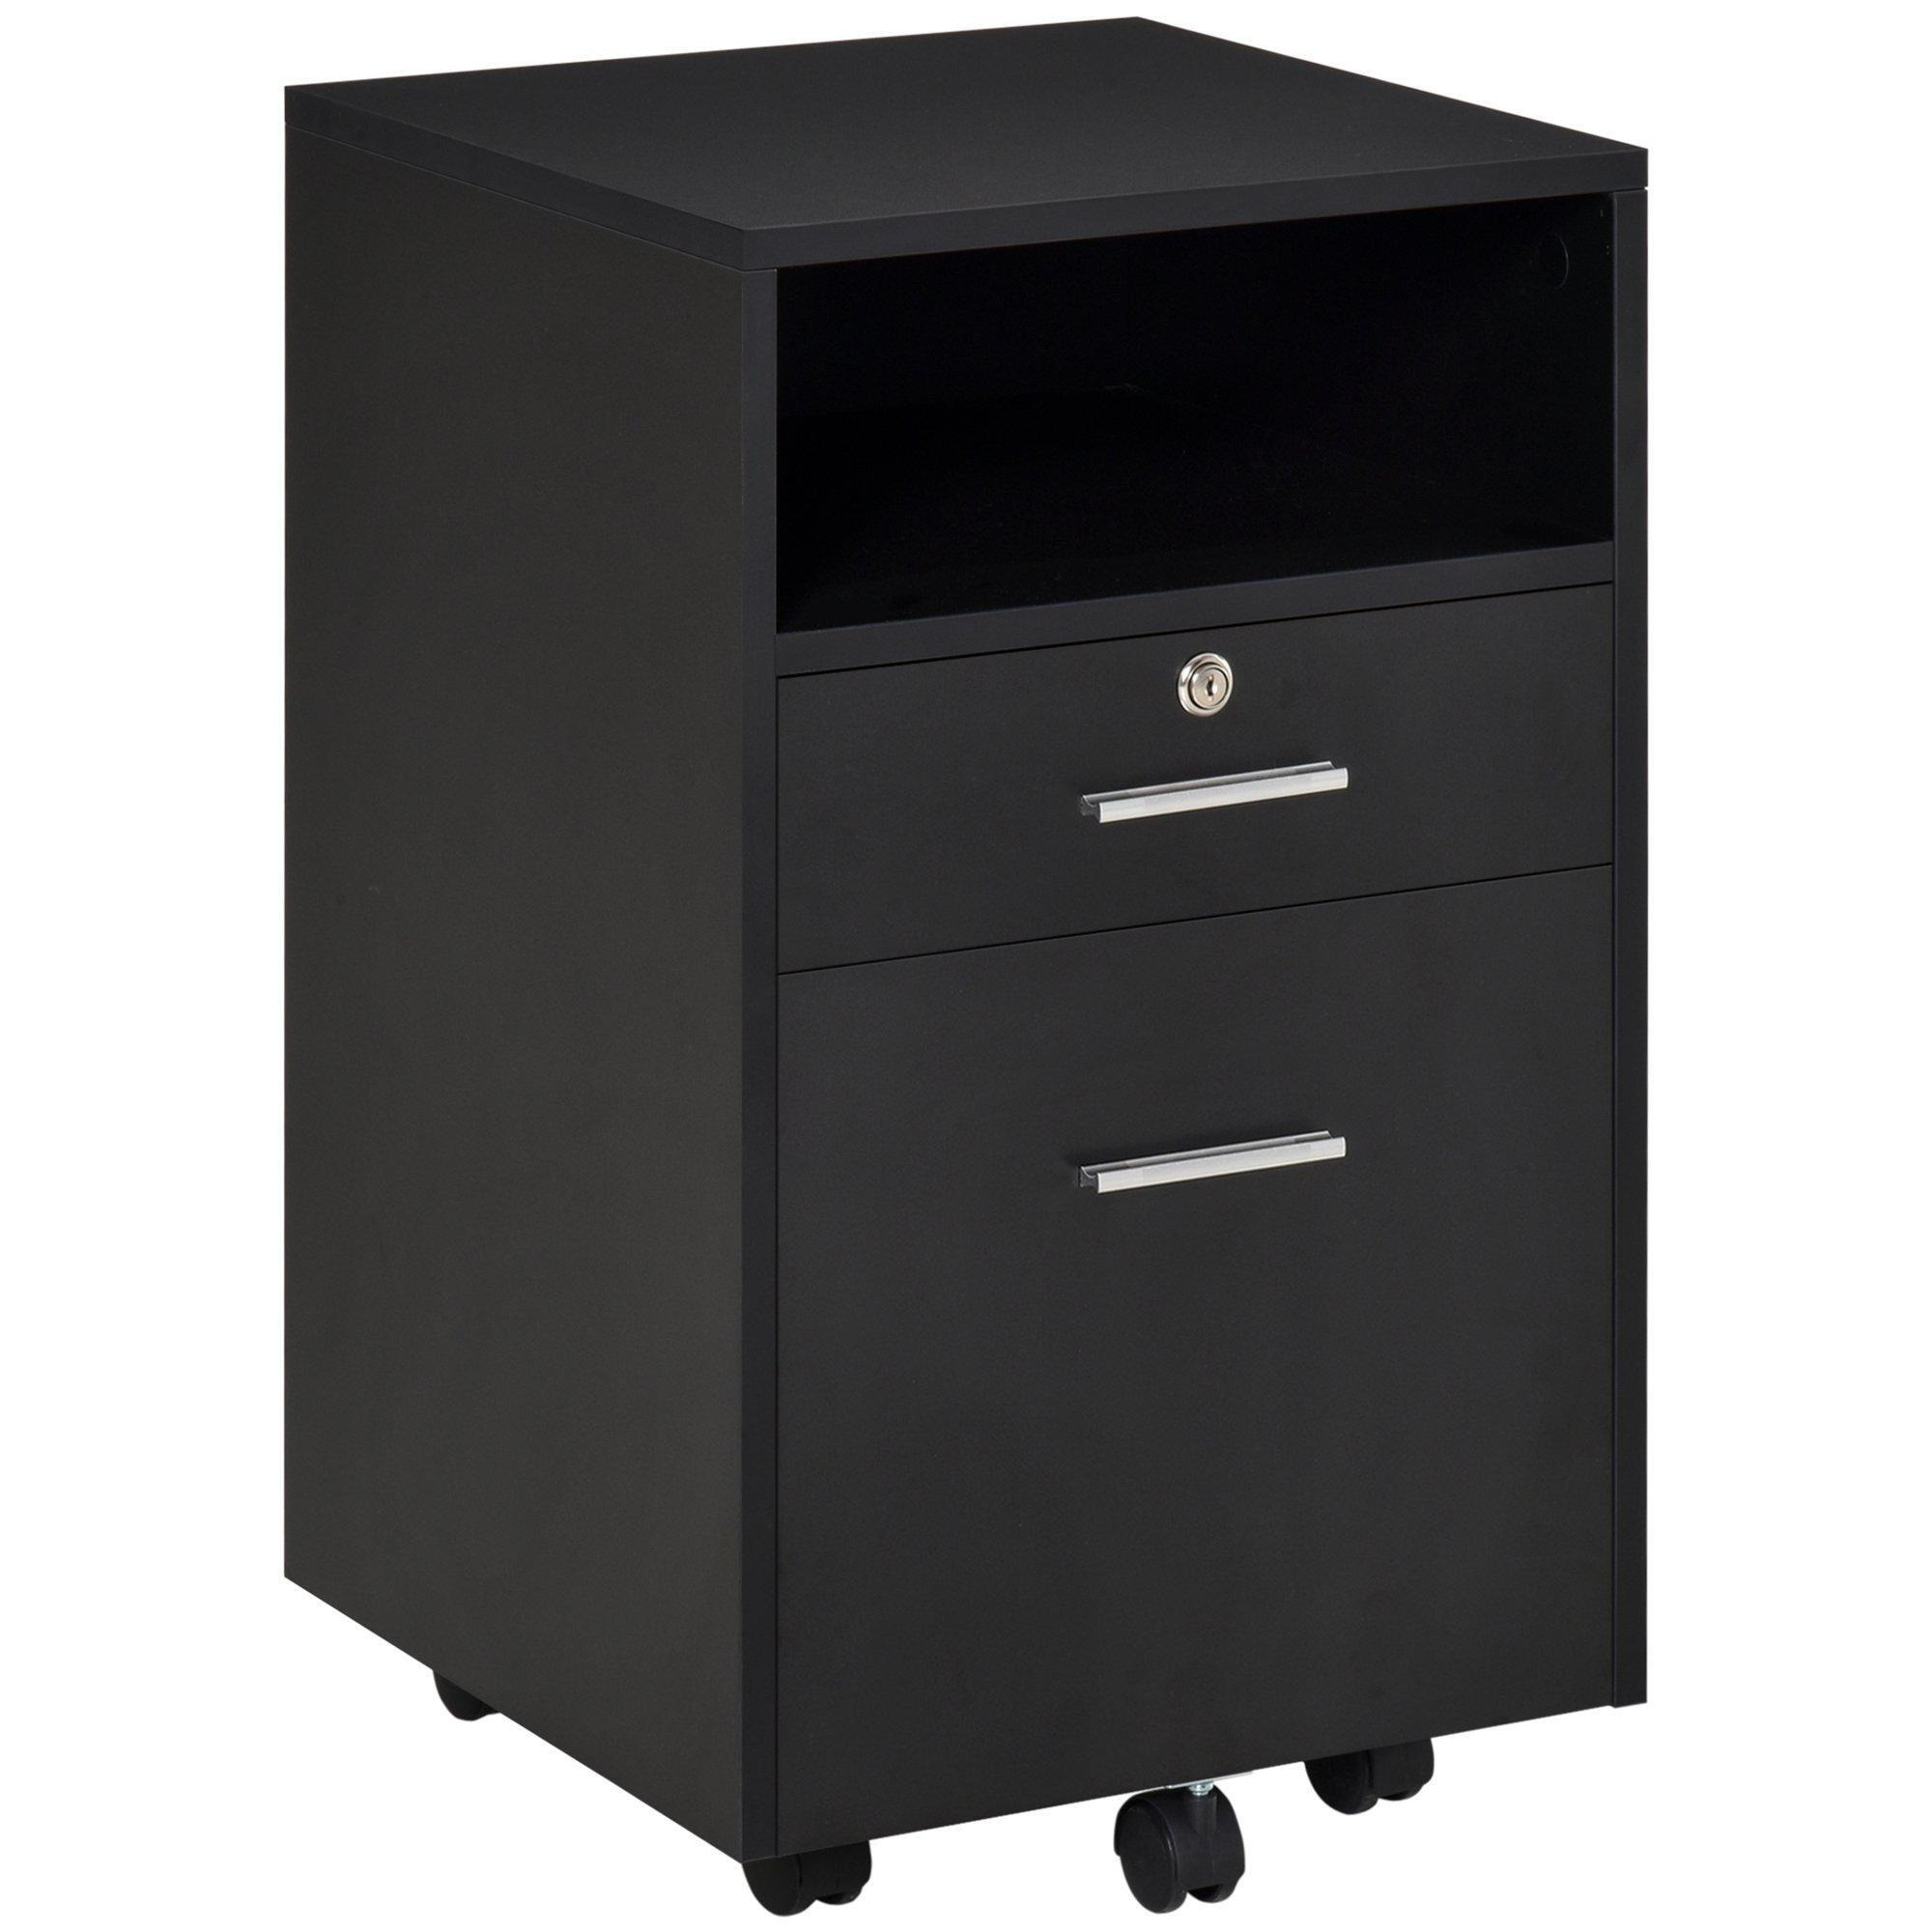 Mobile File Cabinet Lockable Documents Storage Unit with Five Wheels - image 1